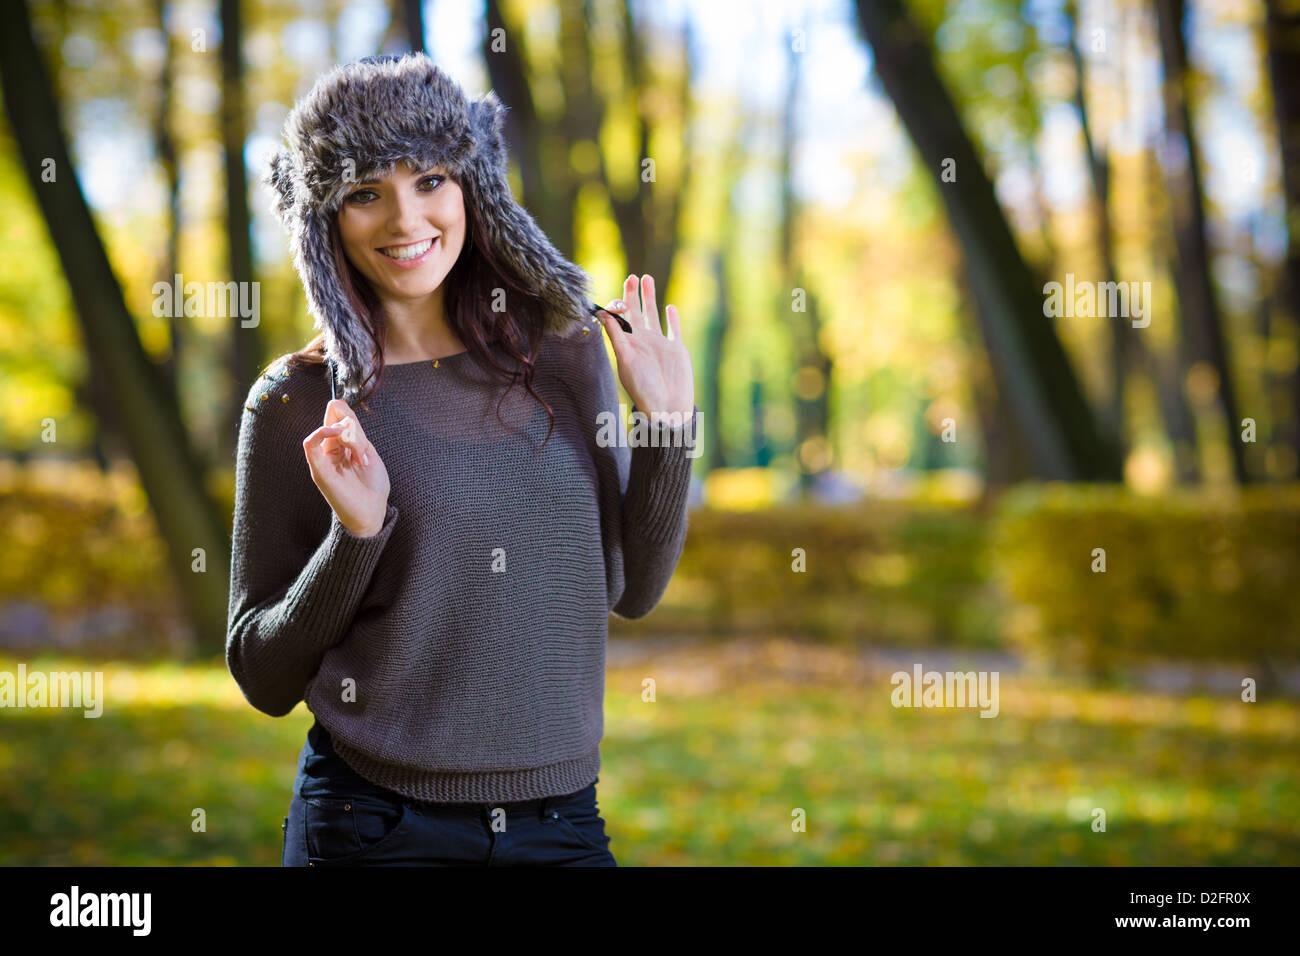 Young woman in Autumn park Stock Photo